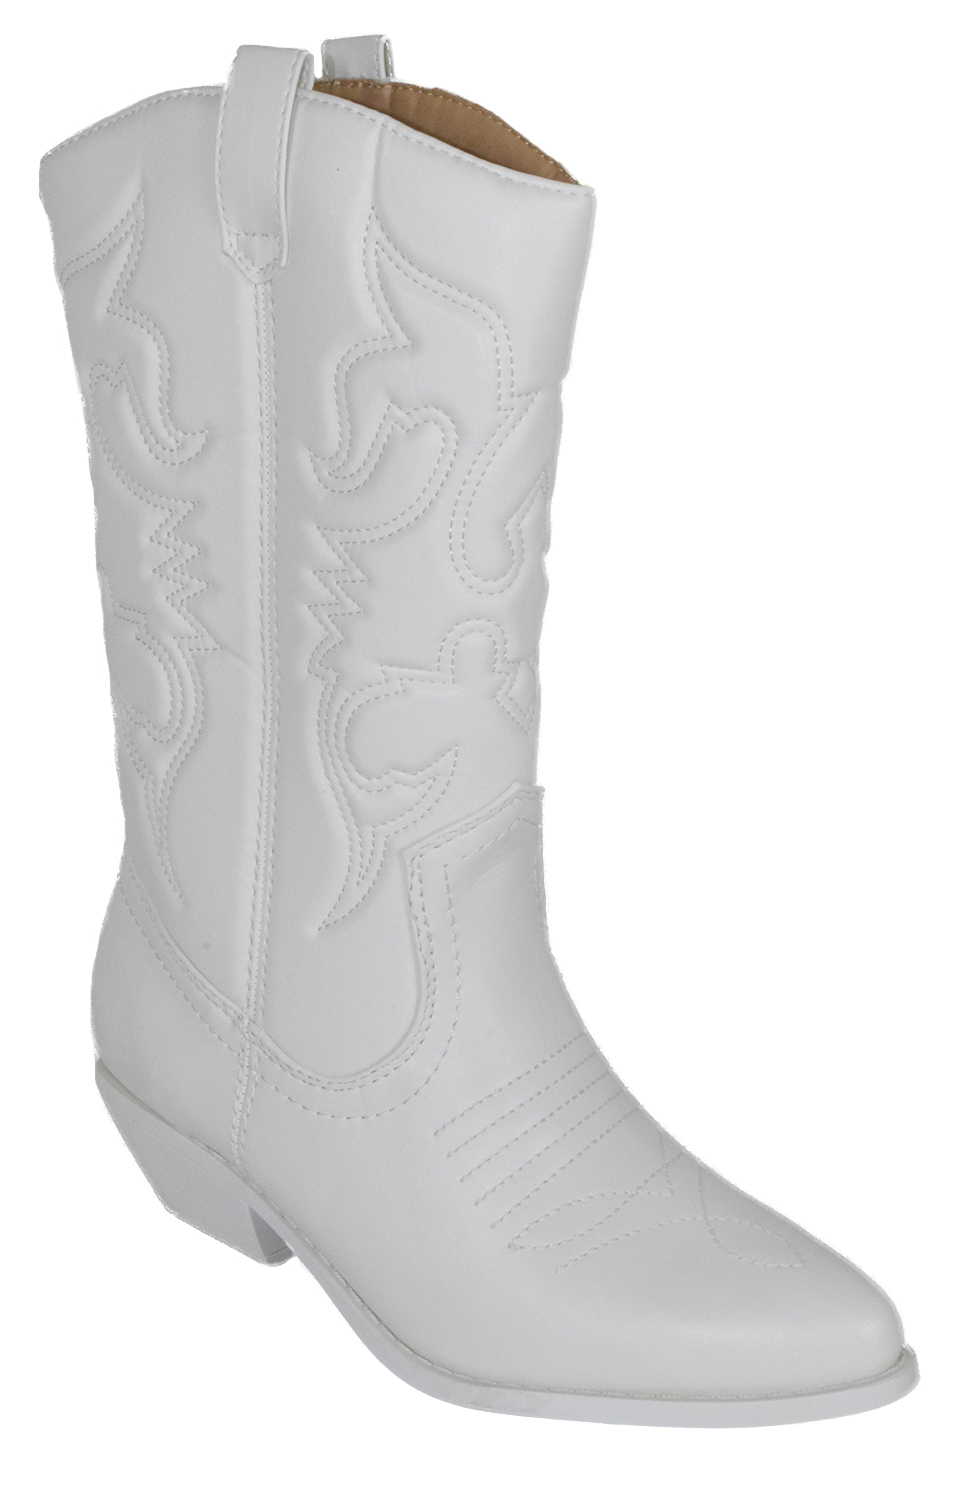 Soda Women Cowgirl Cowboy Western Stitched Boots Pointy Toe Knee High Reno-S All White 10 - image 1 of 2